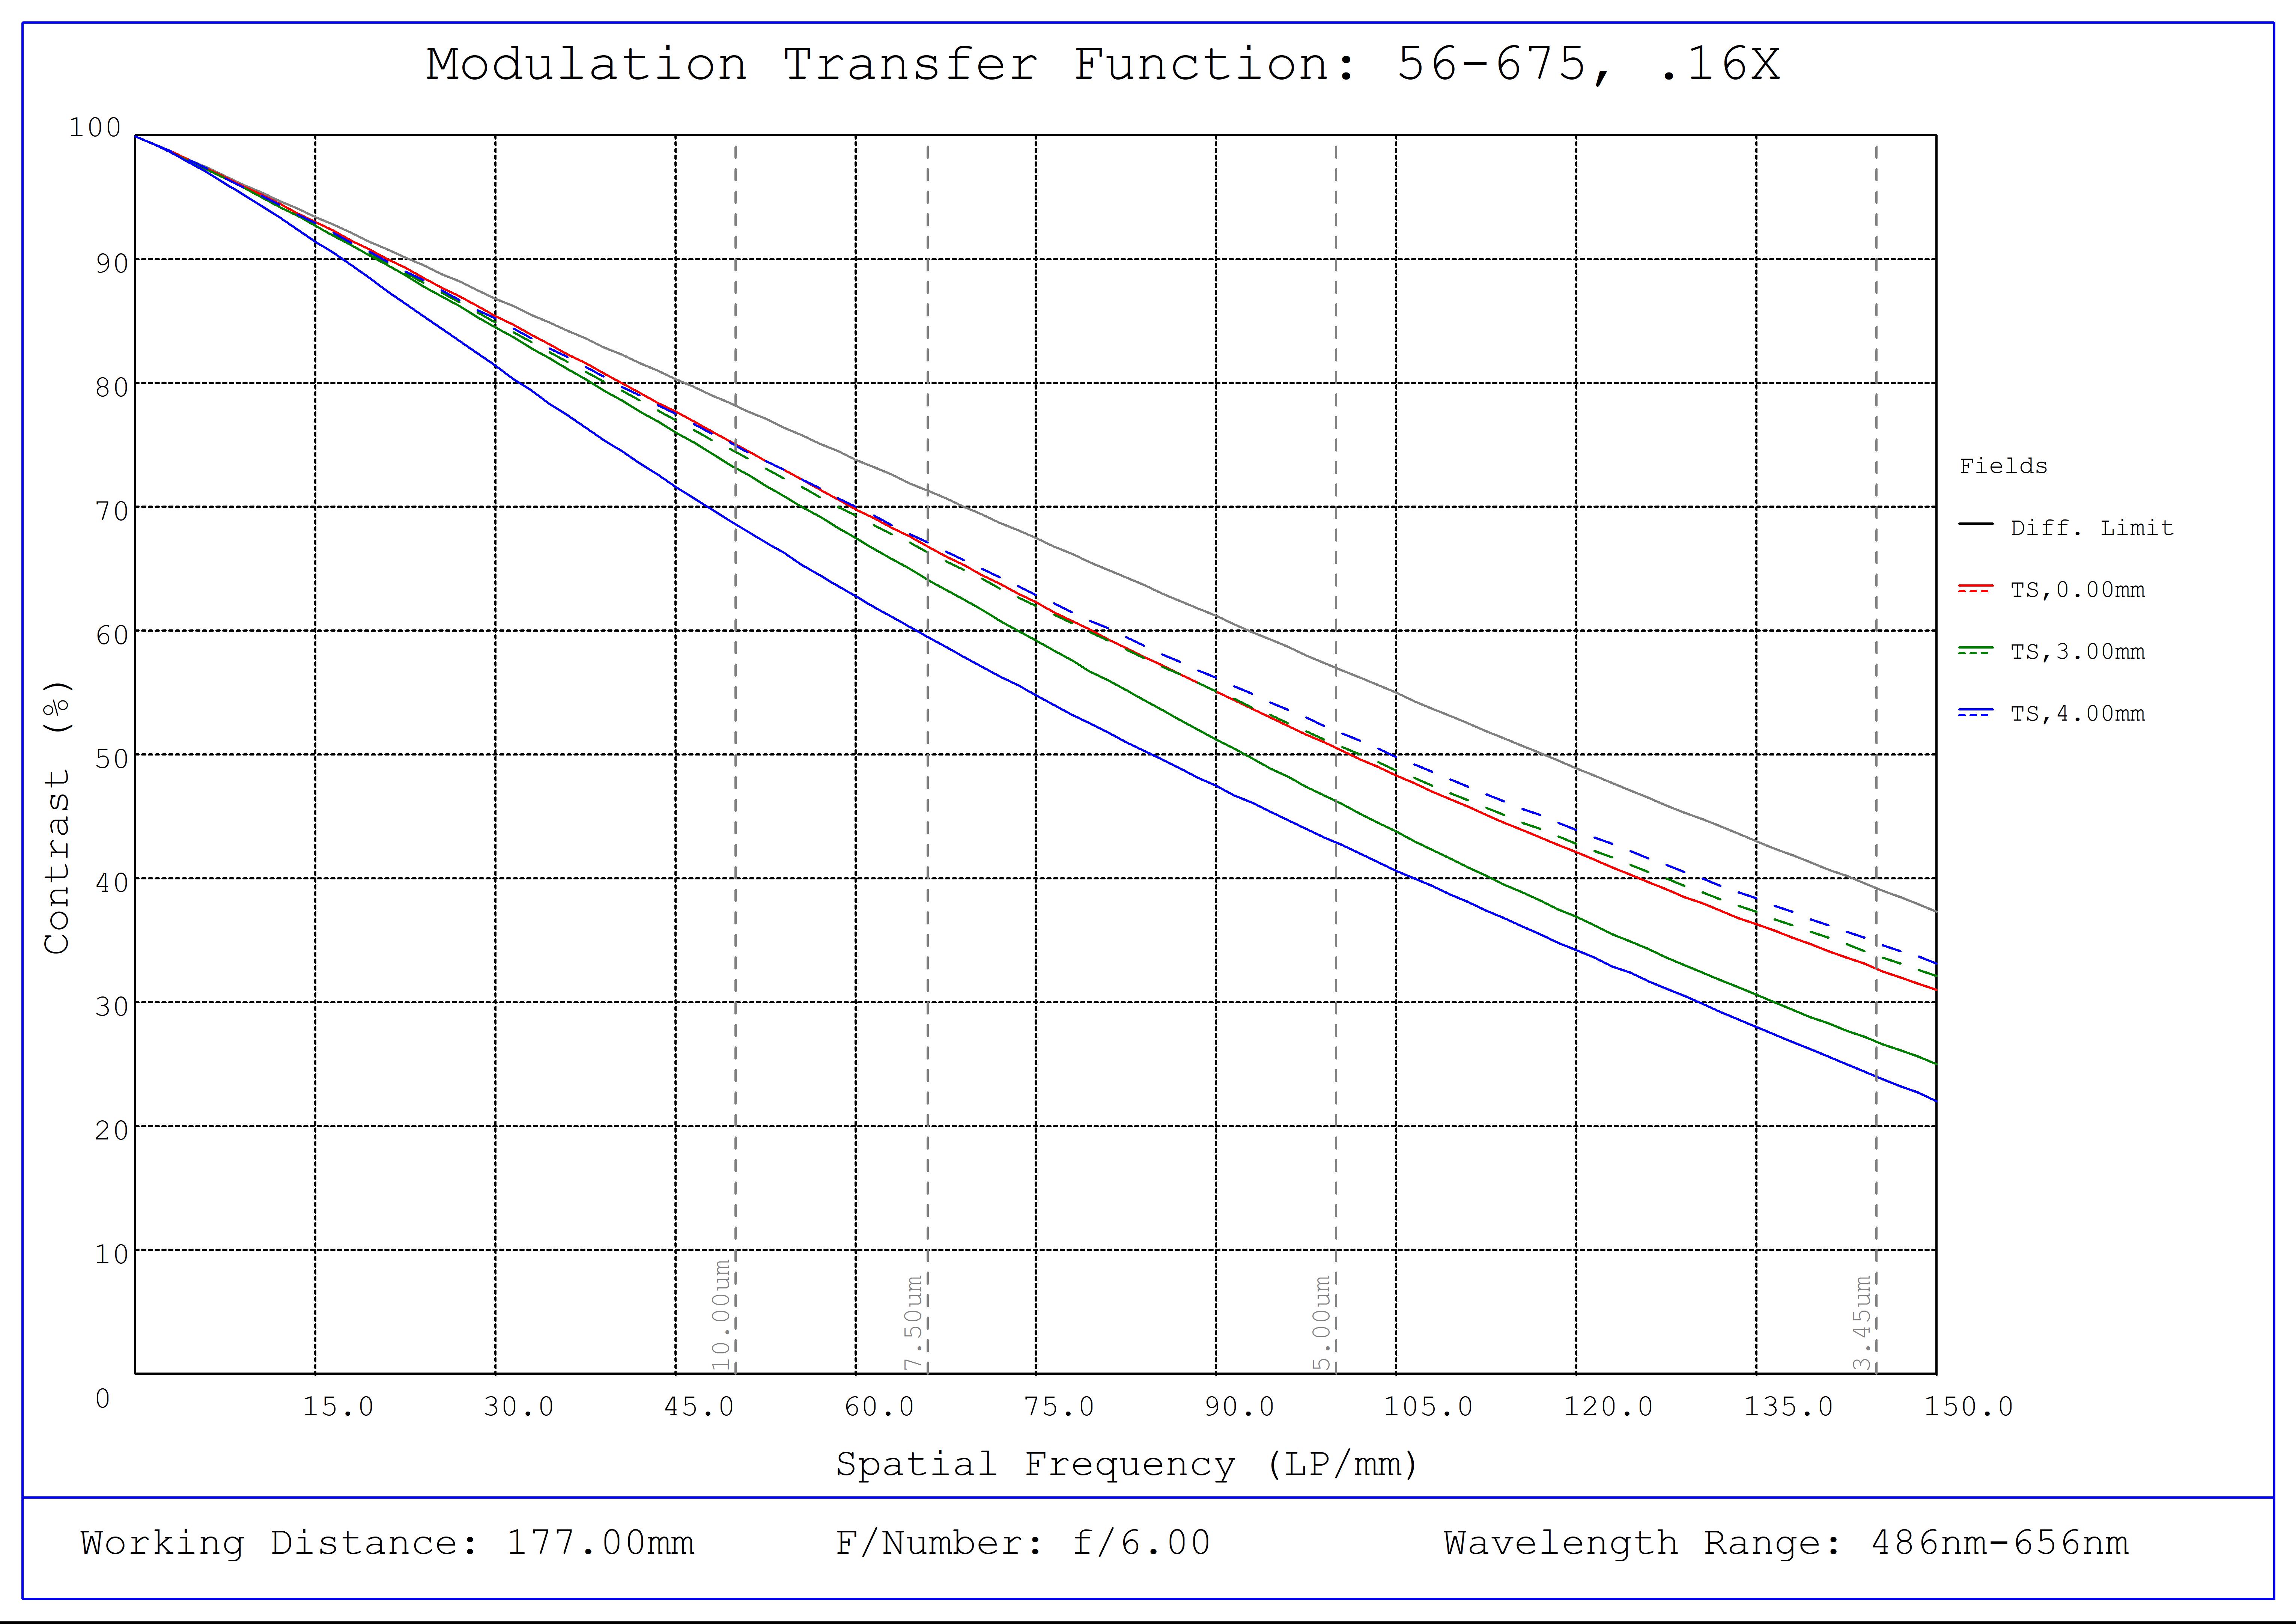 #56-675, 0.16X SilverTL™ Telecentric Lens, Modulated Transfer Function (MTF) Plot, 177mm Working Distance, f6